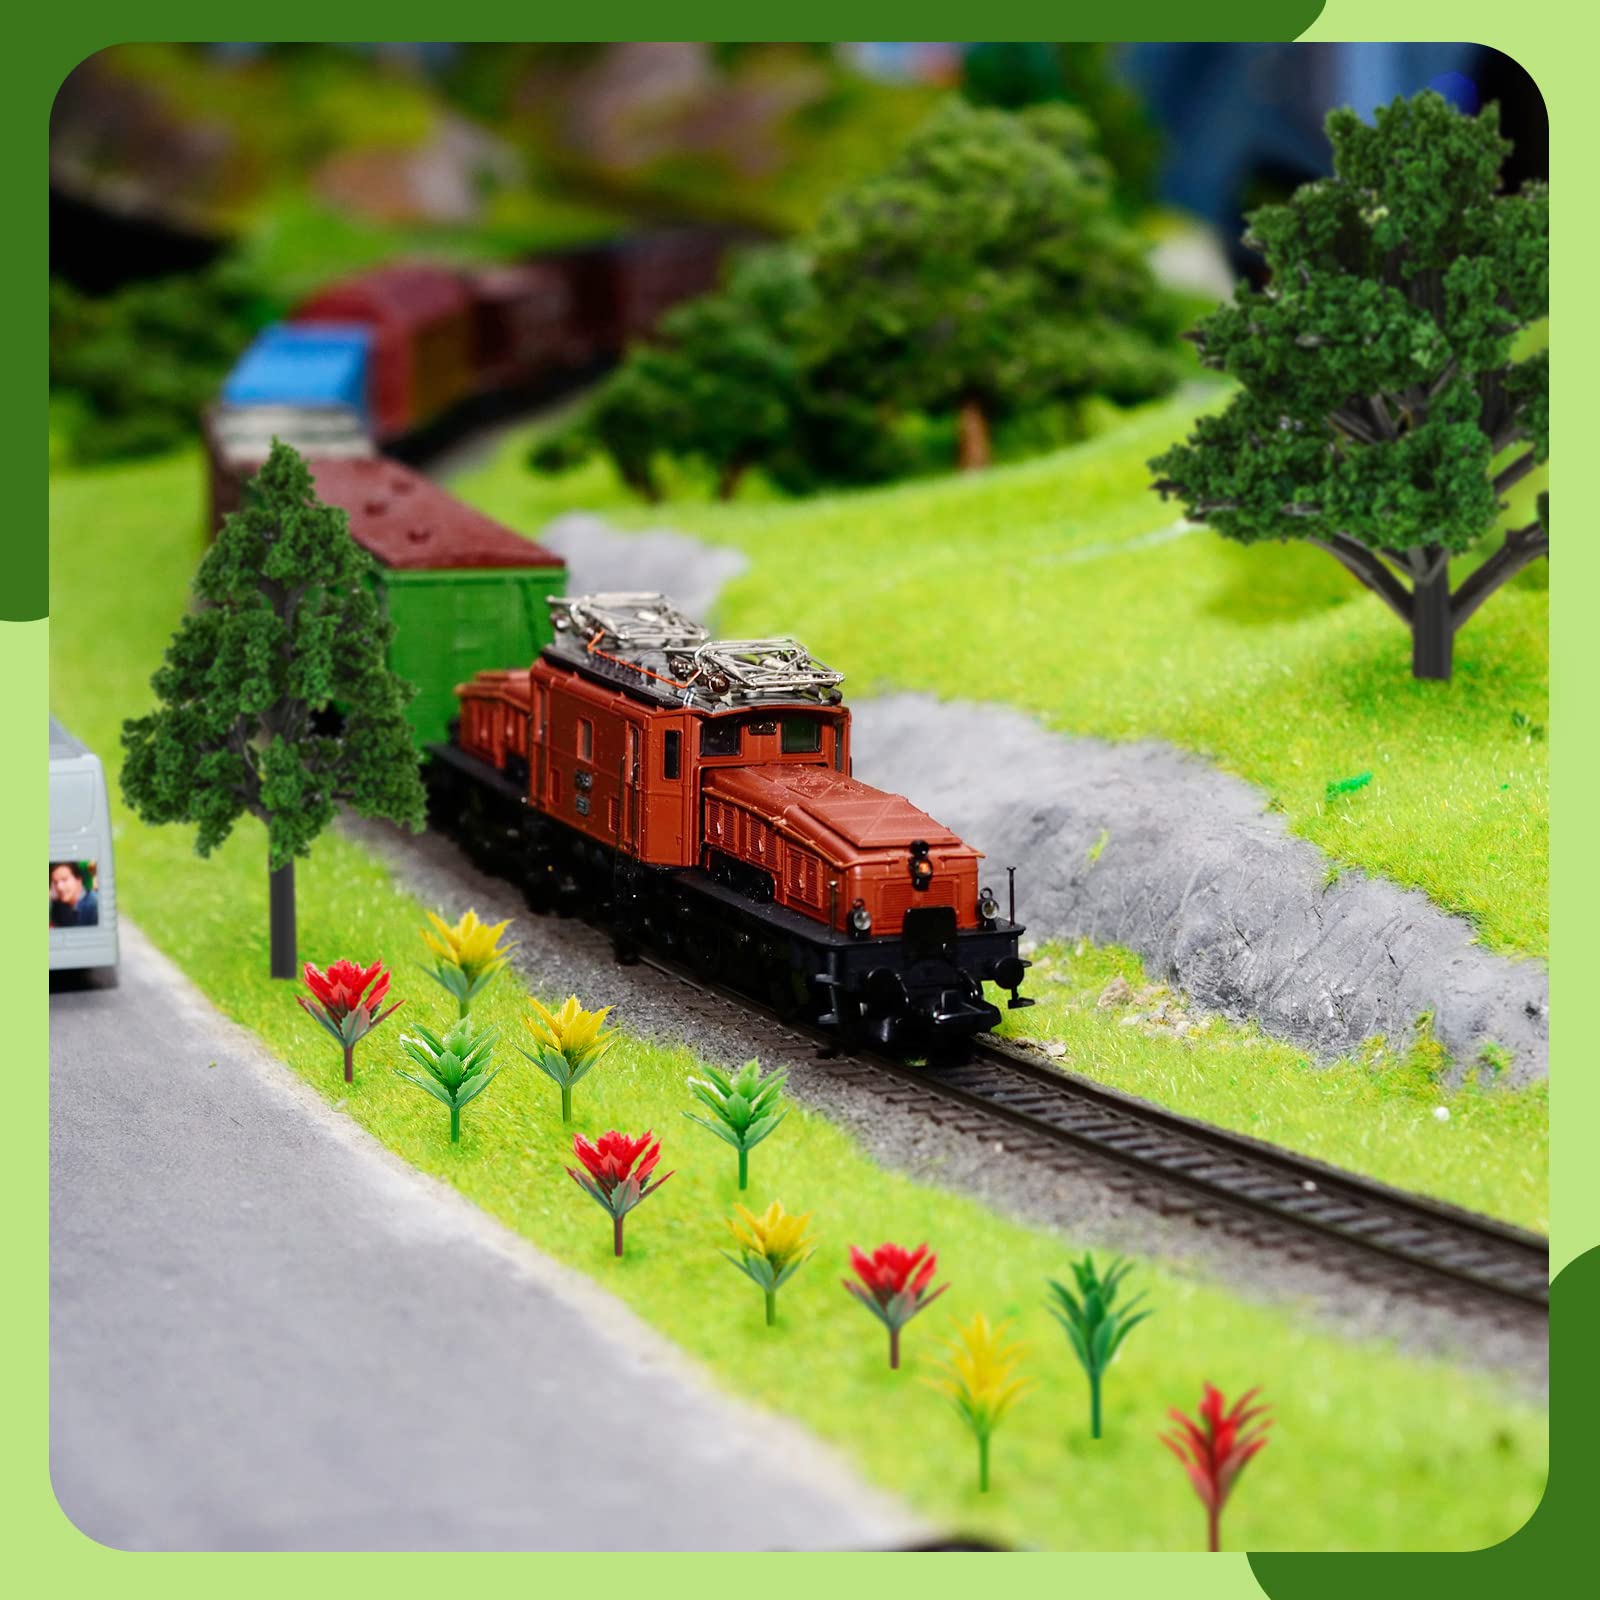 Crowye 160 Pcs Mixed Model Trees Mini Diorama Trees Diorama Supplies Miniature Trees for Crafts Fake Toy Trees Model Train Scenery for Diorama Train Garden Scenery Railway Sand Architecture Model